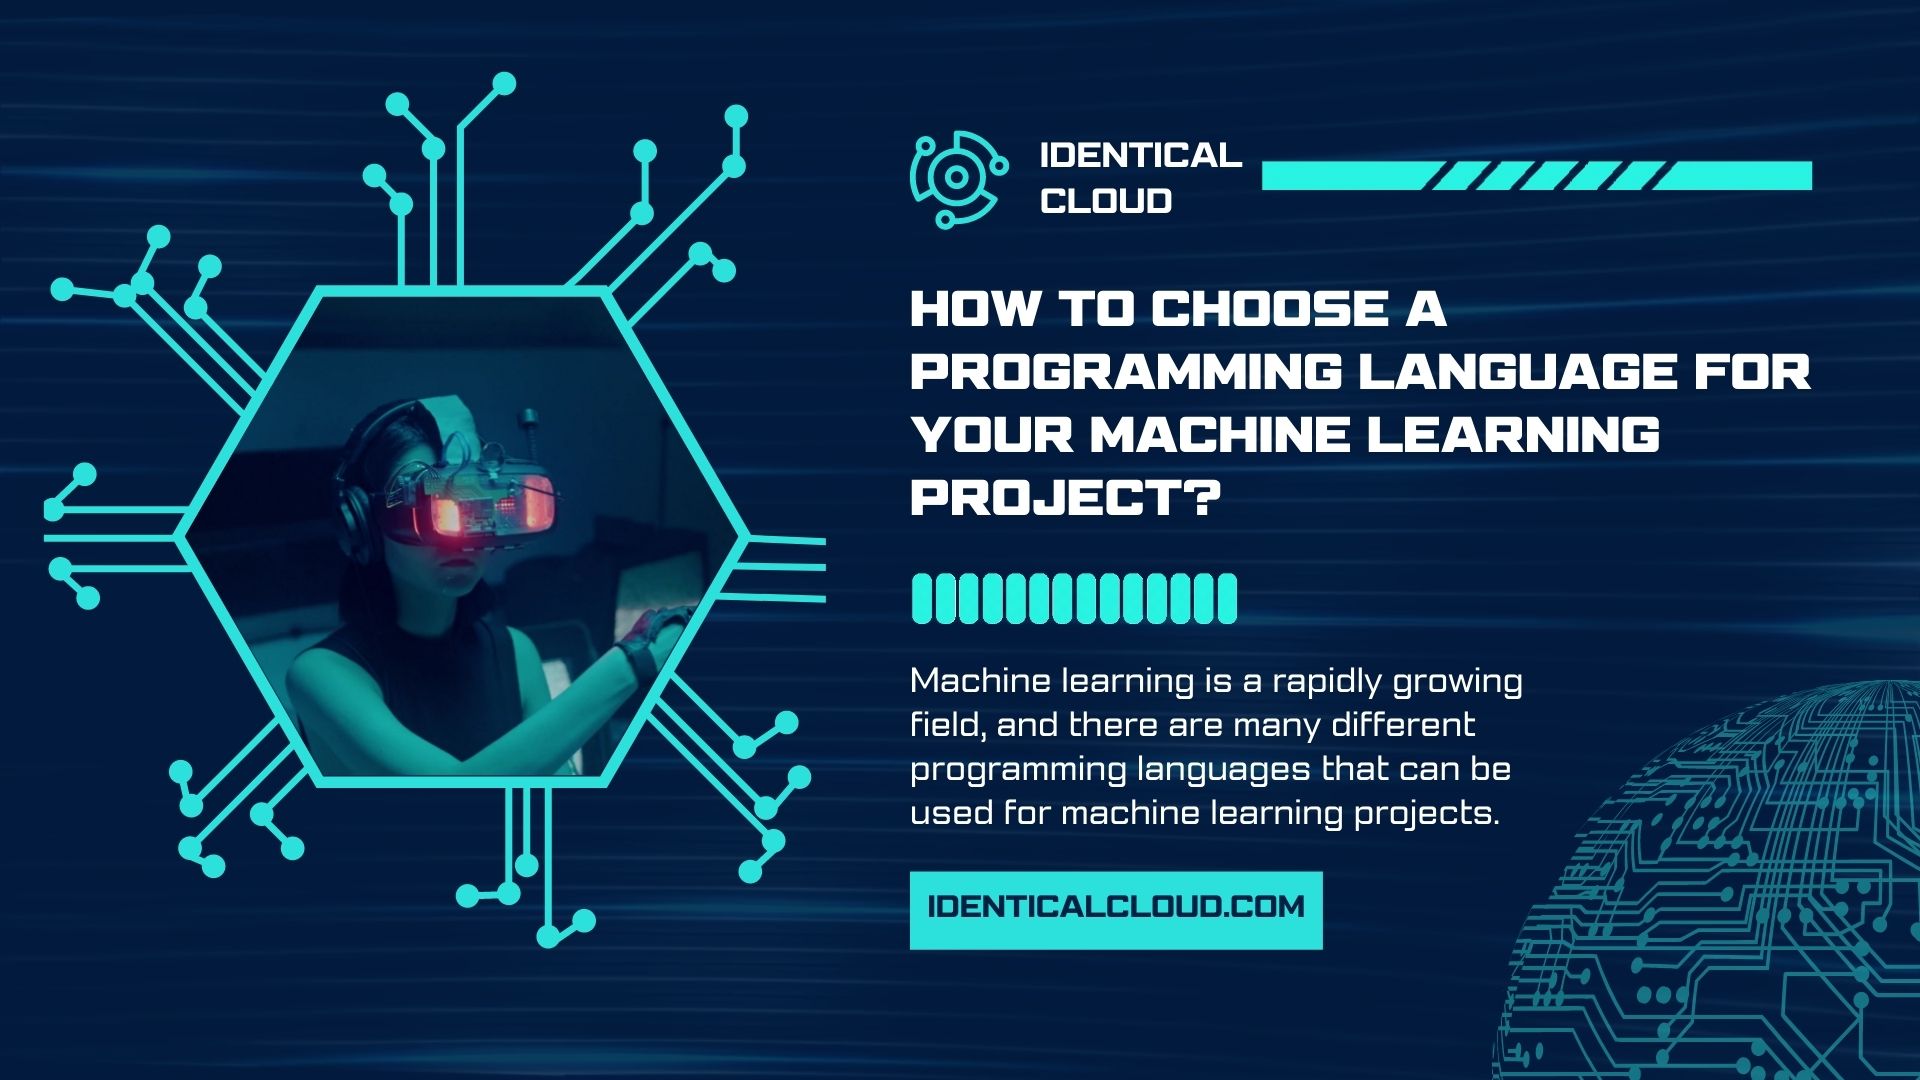 How to Choose a Programming Language for your Machine Learning Project - identicalcloud.com